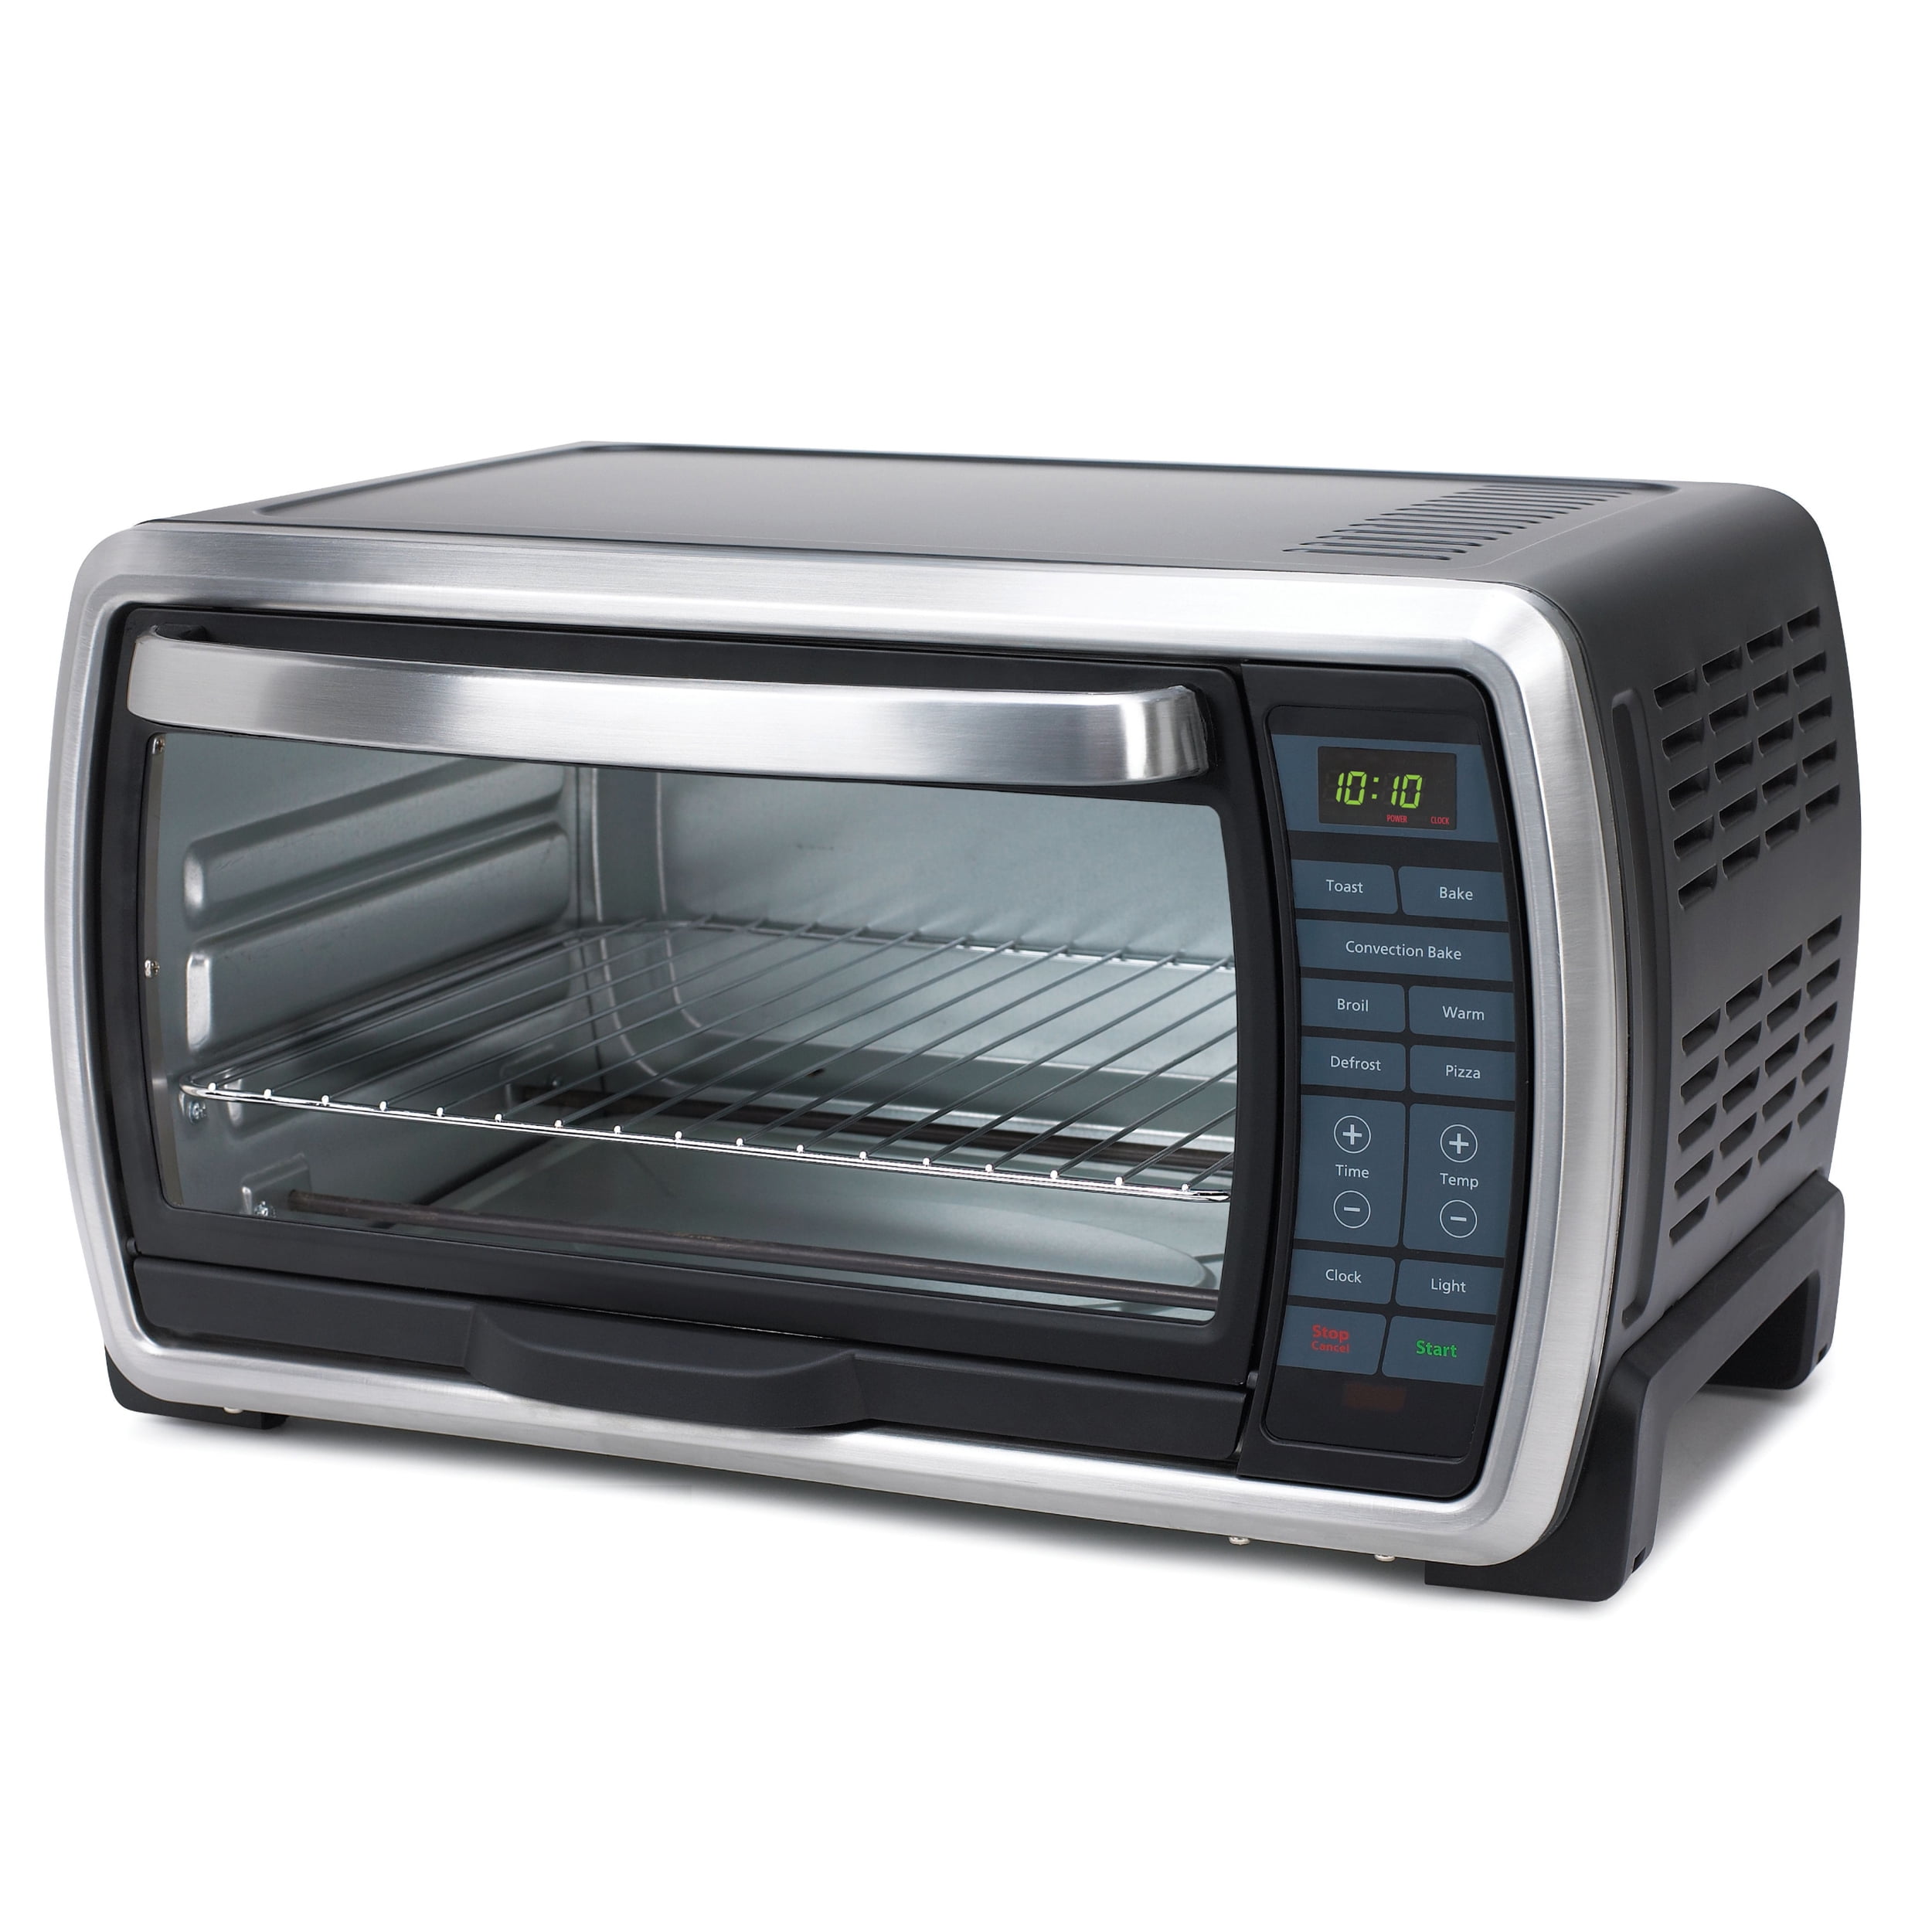  Oster Toaster Oven  Digital Convection Oven, Large 6-Slice  Capacity, Black/Polished Stainless: Home & Kitchen